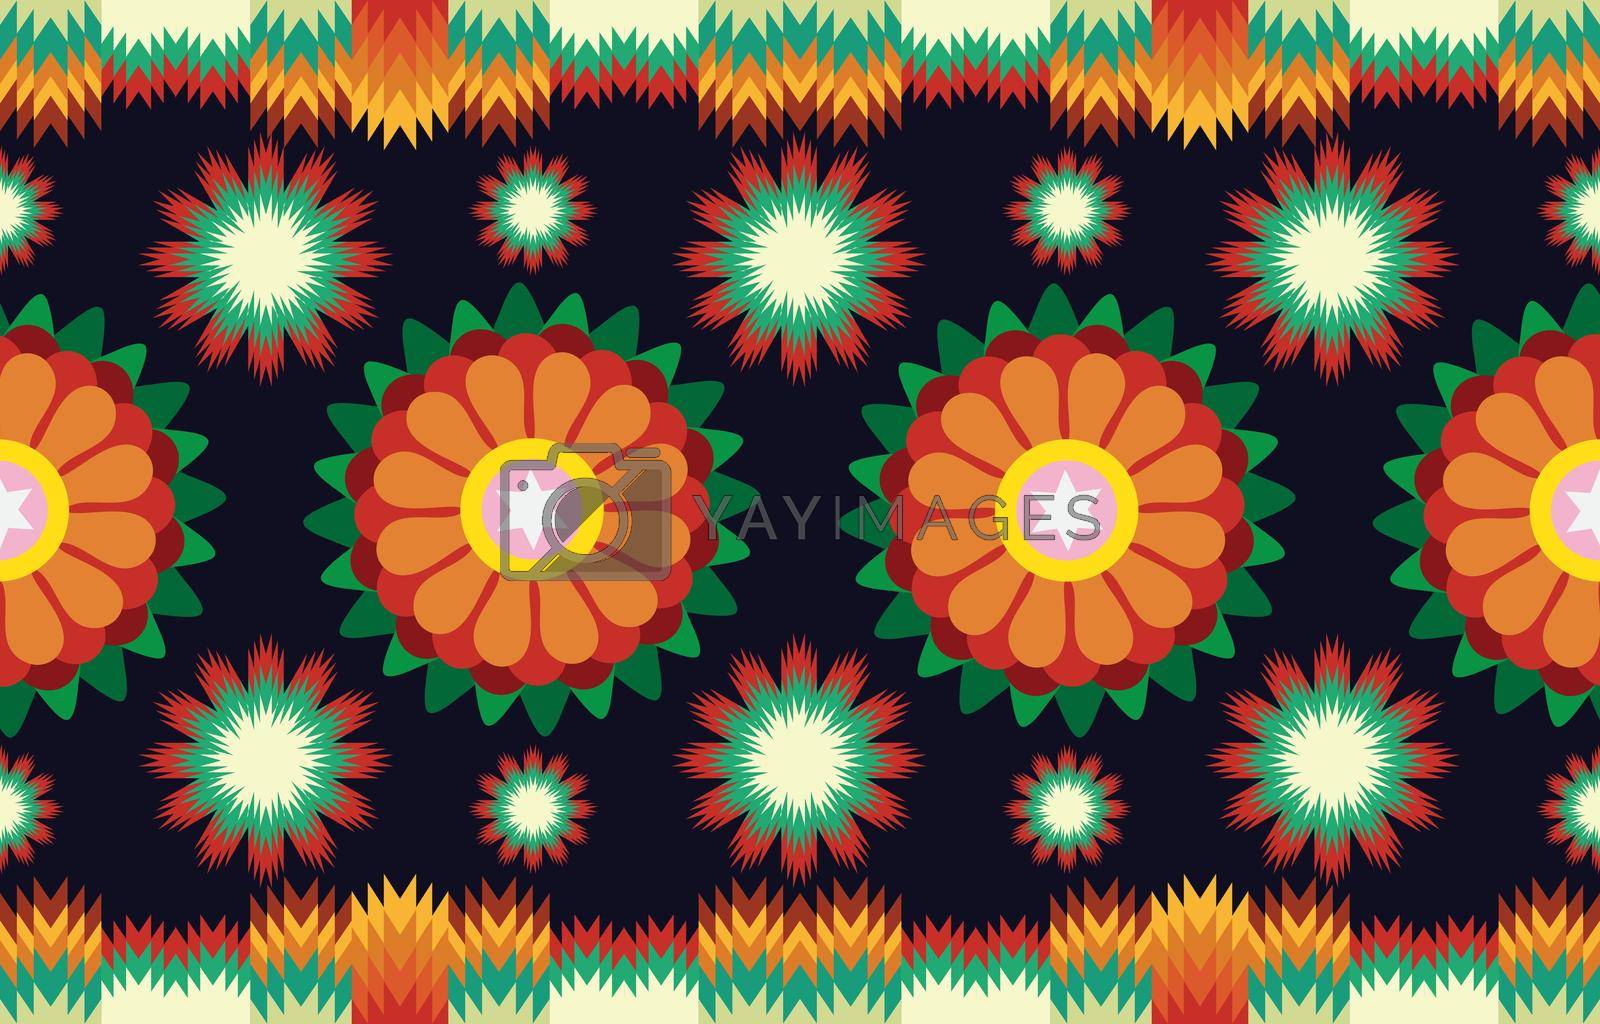 Royalty free image of Ethnic geometric pattern design for background or wallpaper. by gantwell